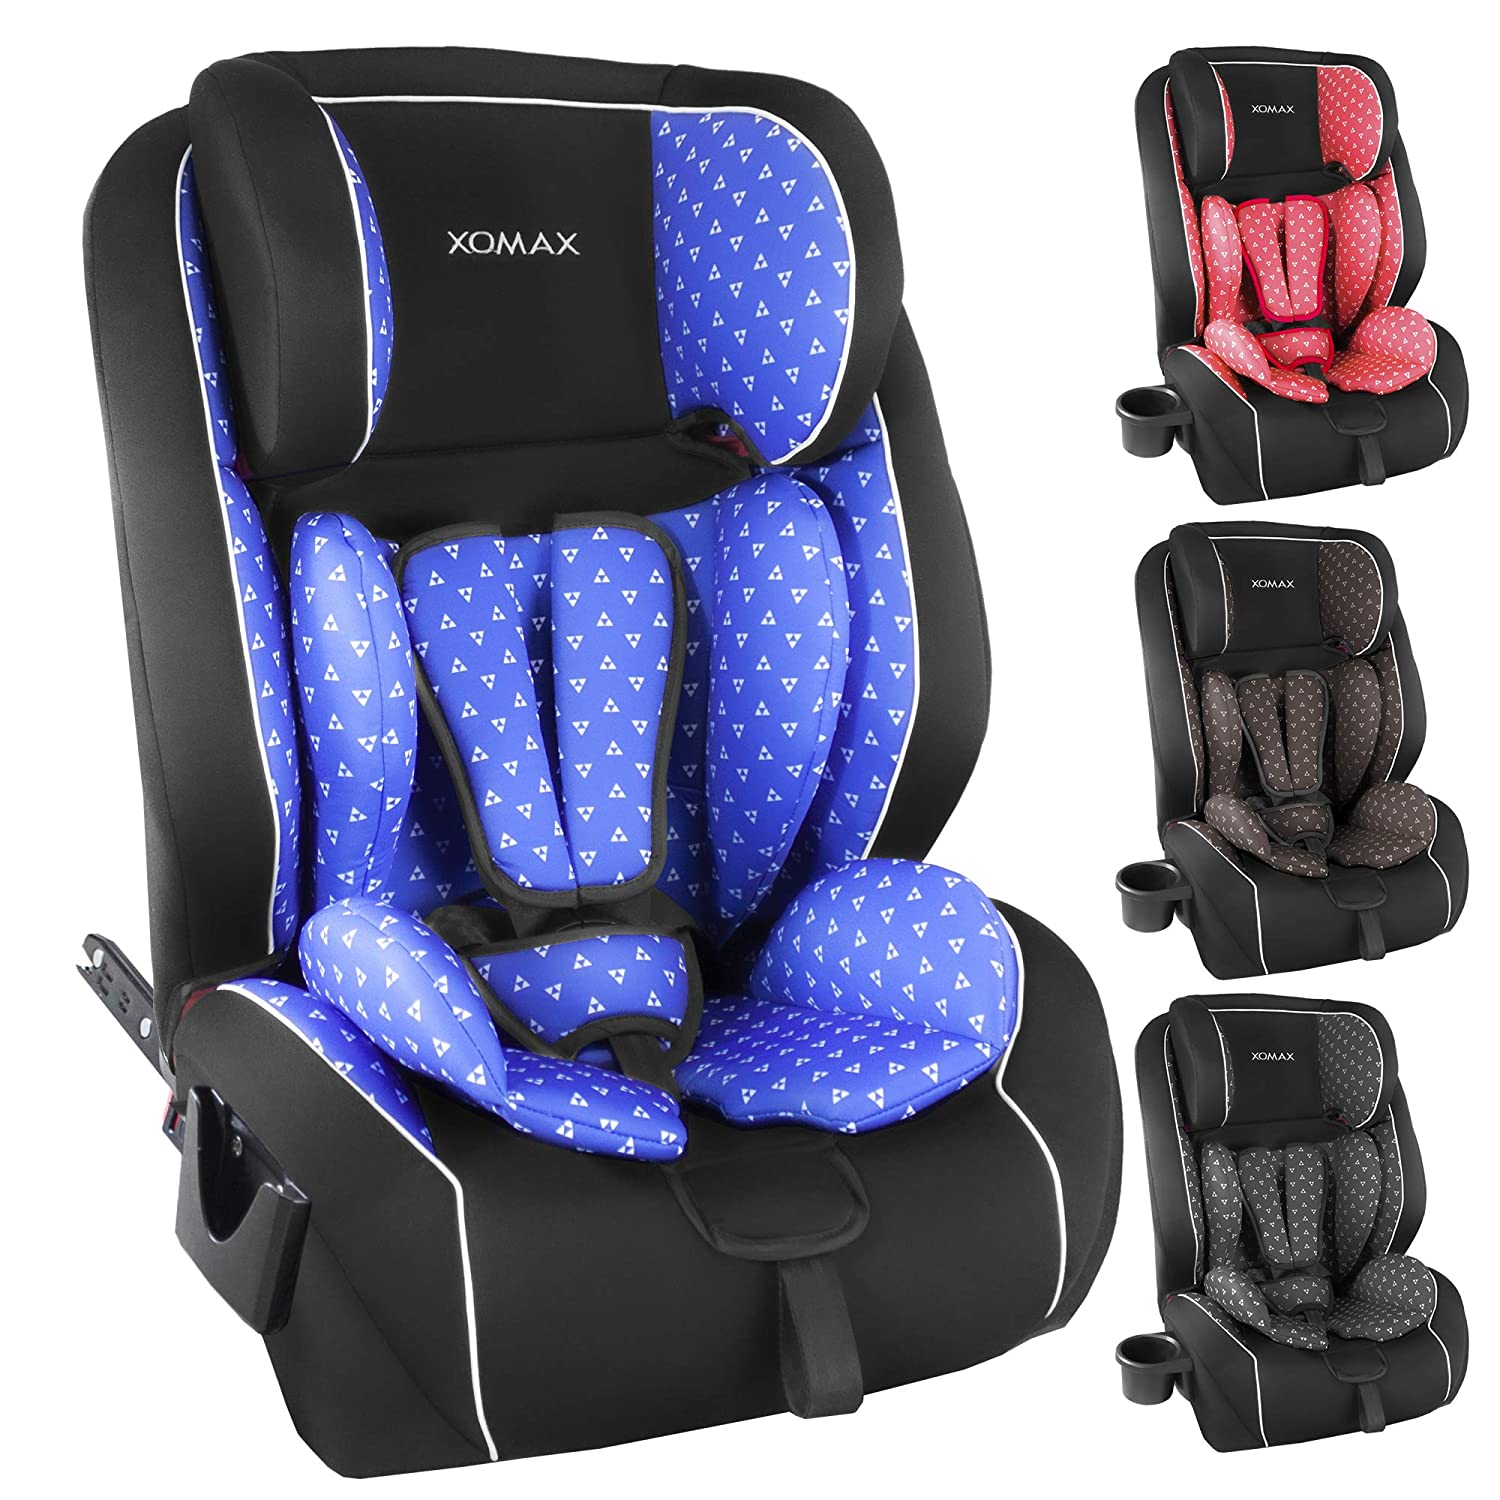 XOMAX XL-518 Child\'s Seat with ISOFIX, Grows with your child, 9-36 kg 1-12 Years Group 1/2/3, 5-Point Harness and 3-Point Harness Removable and Washable Cover ECE R44/04 beige